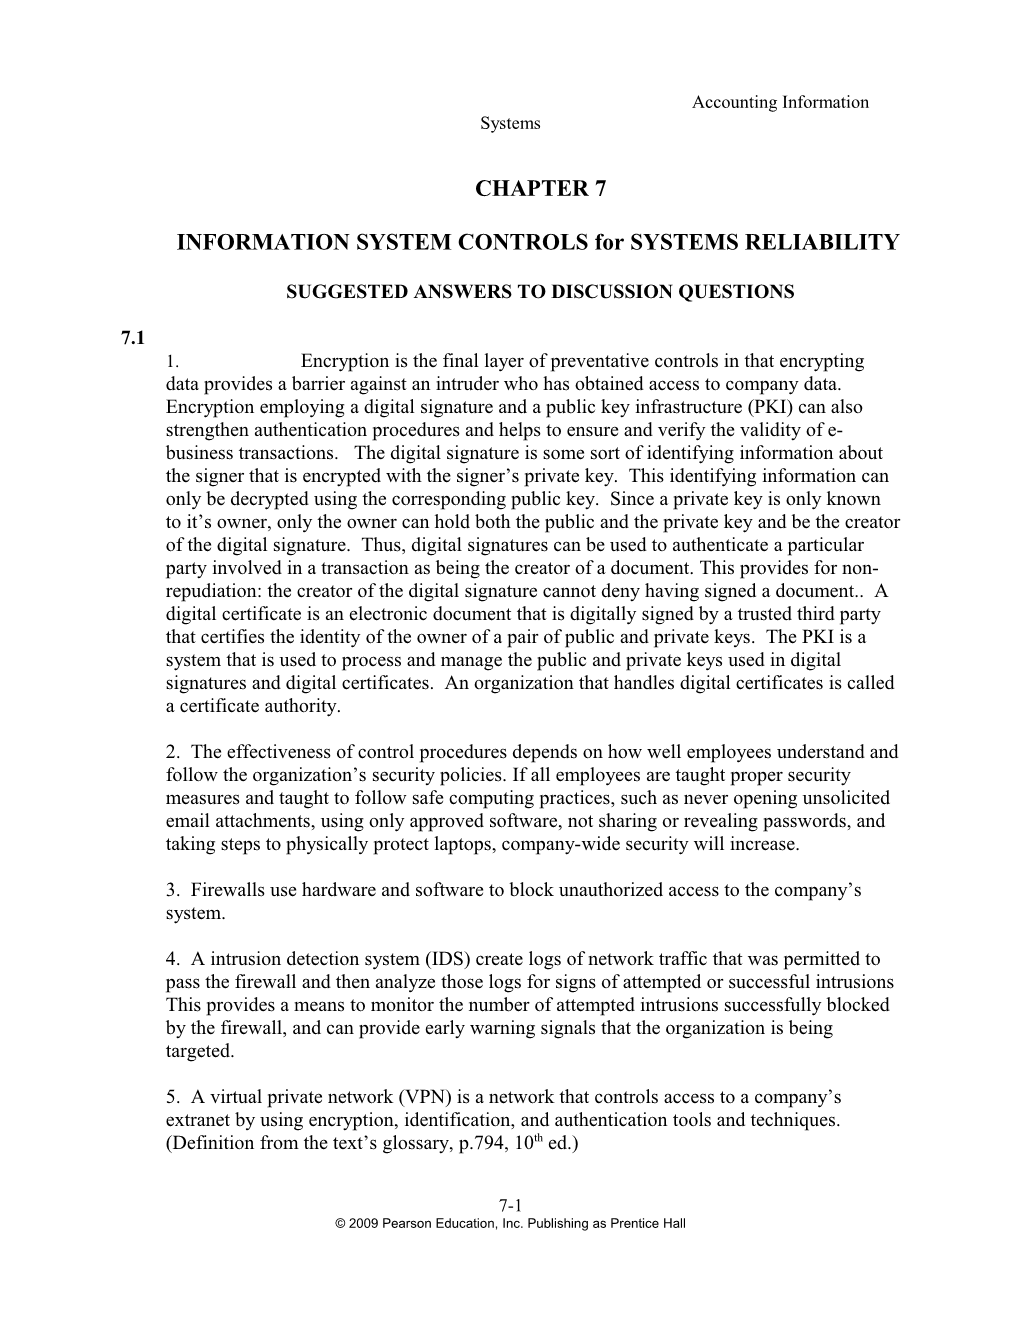 INFORMATION SYSTEM CONTROLS for SYSTEMS RELIABILITY